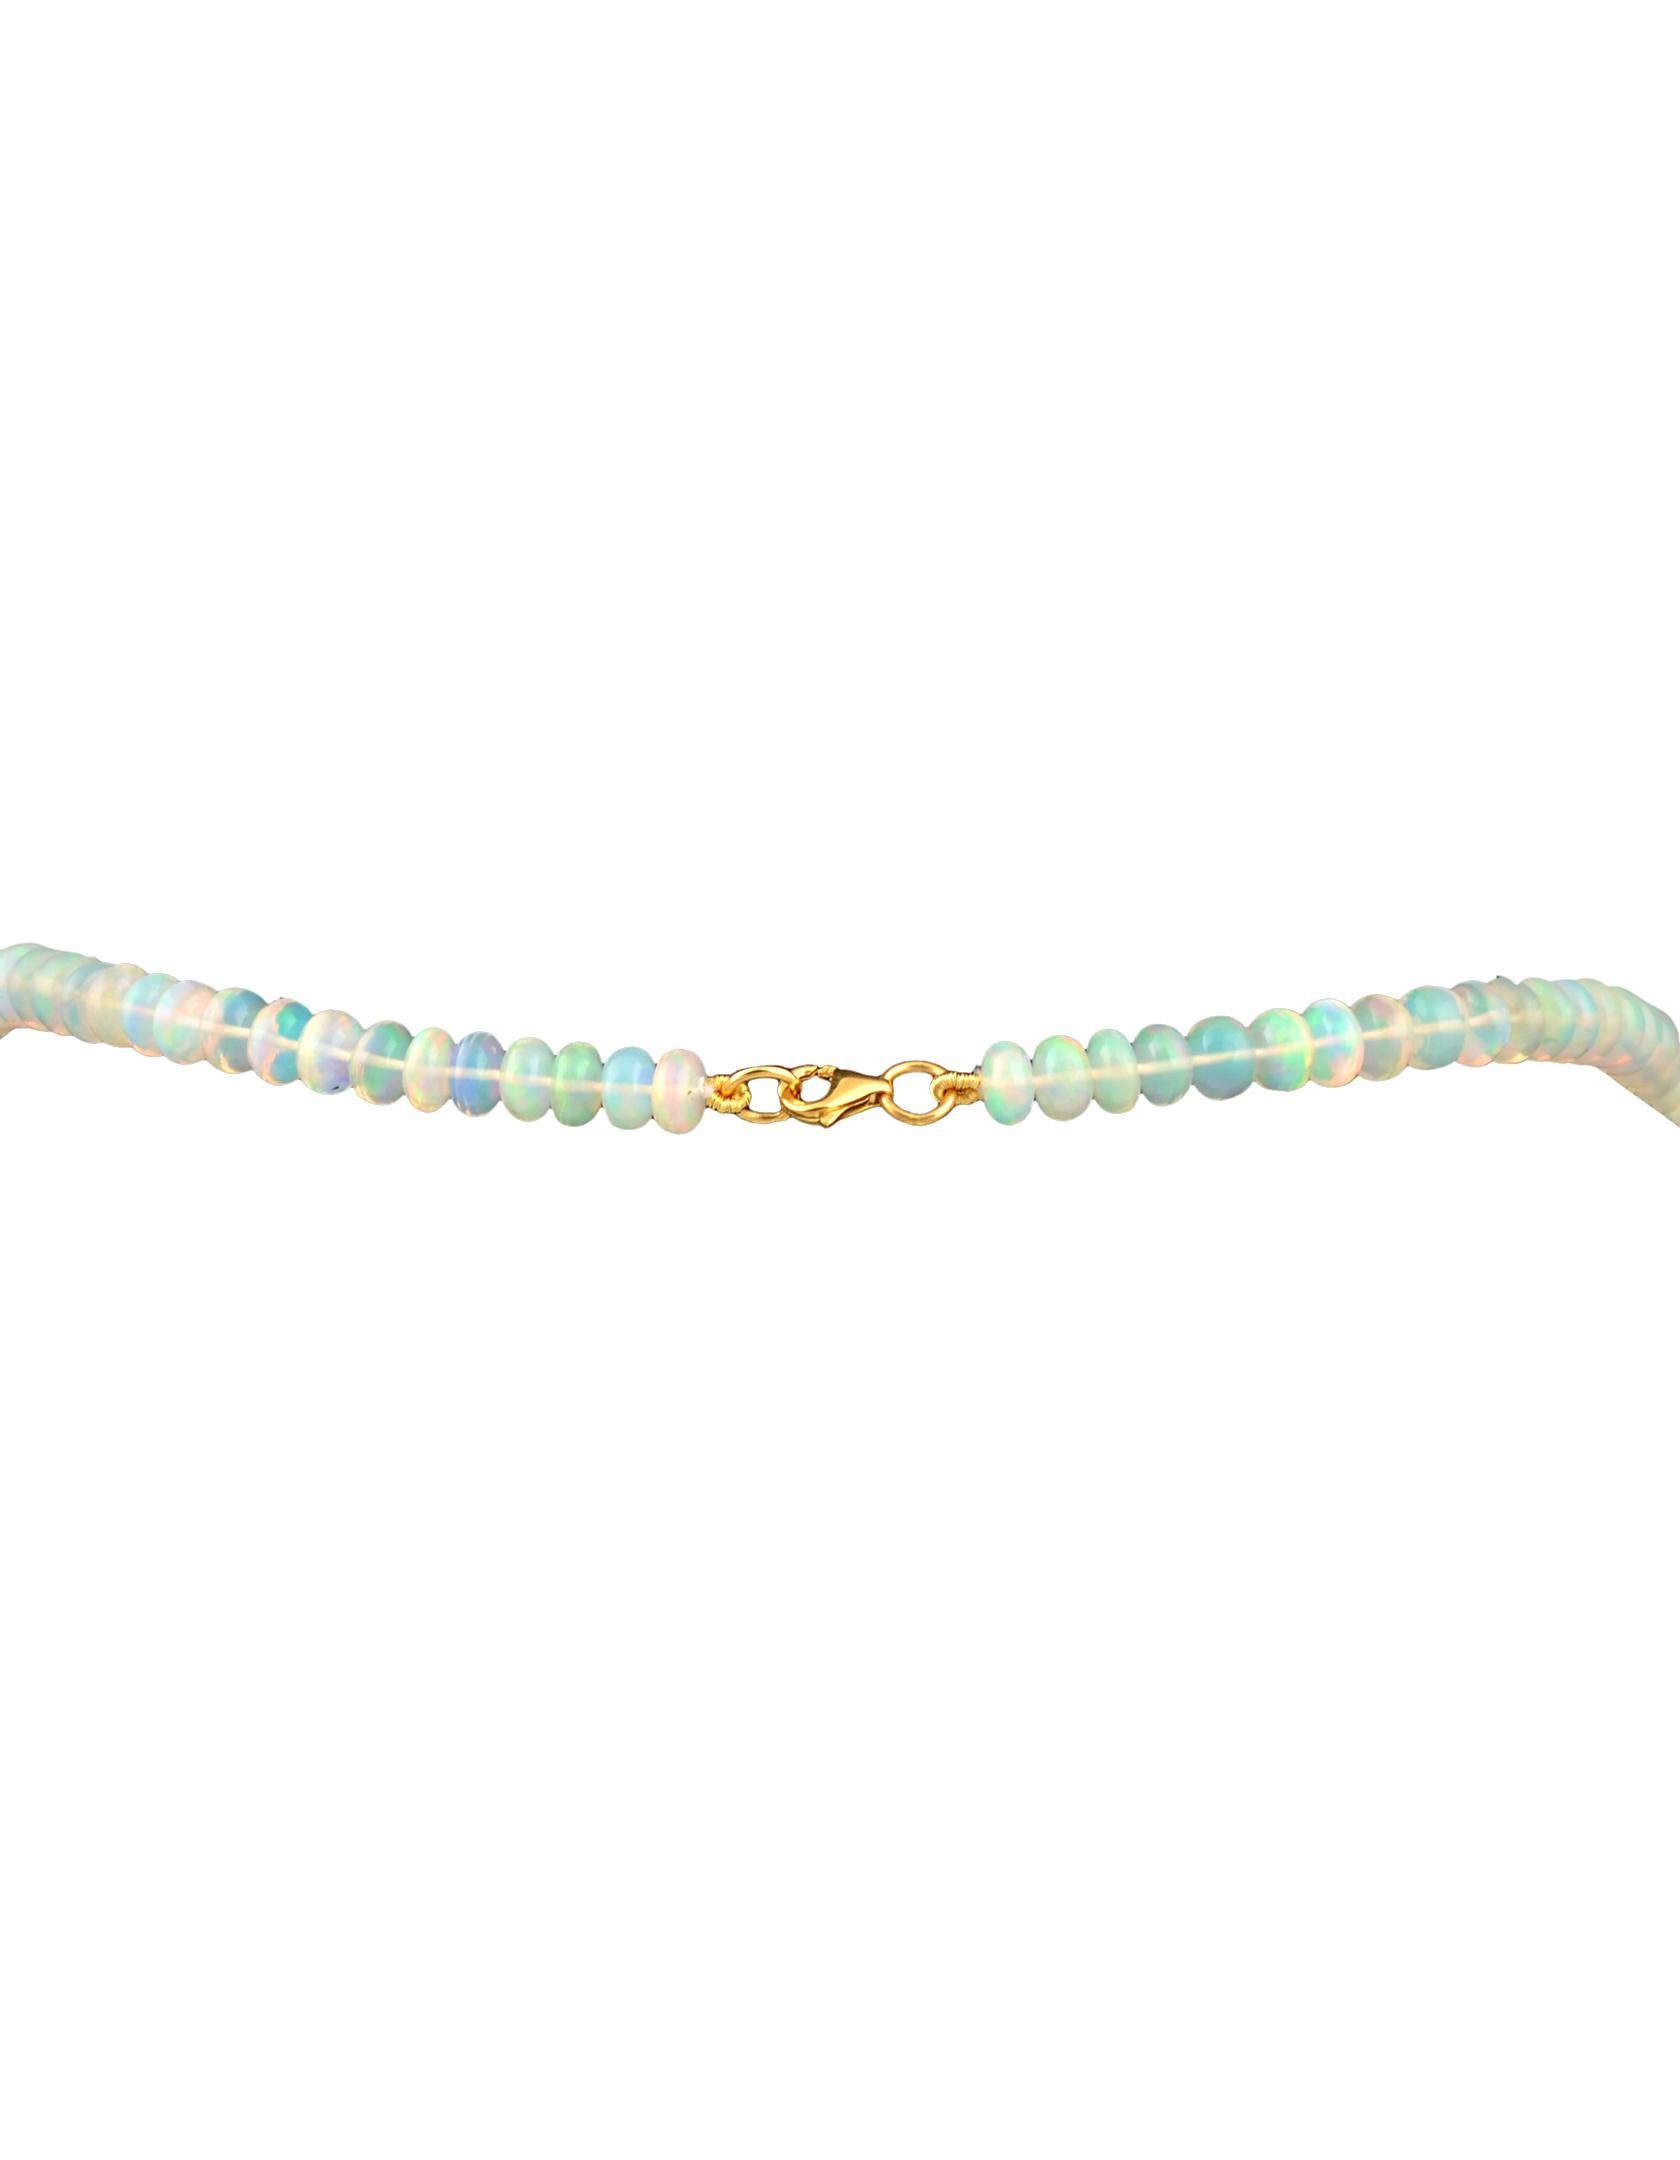 Natural 110 Ct Ethiopian Opal Bead Single Strand Necklace 14 Karat Yellow Gold In Excellent Condition For Sale In New York, NY